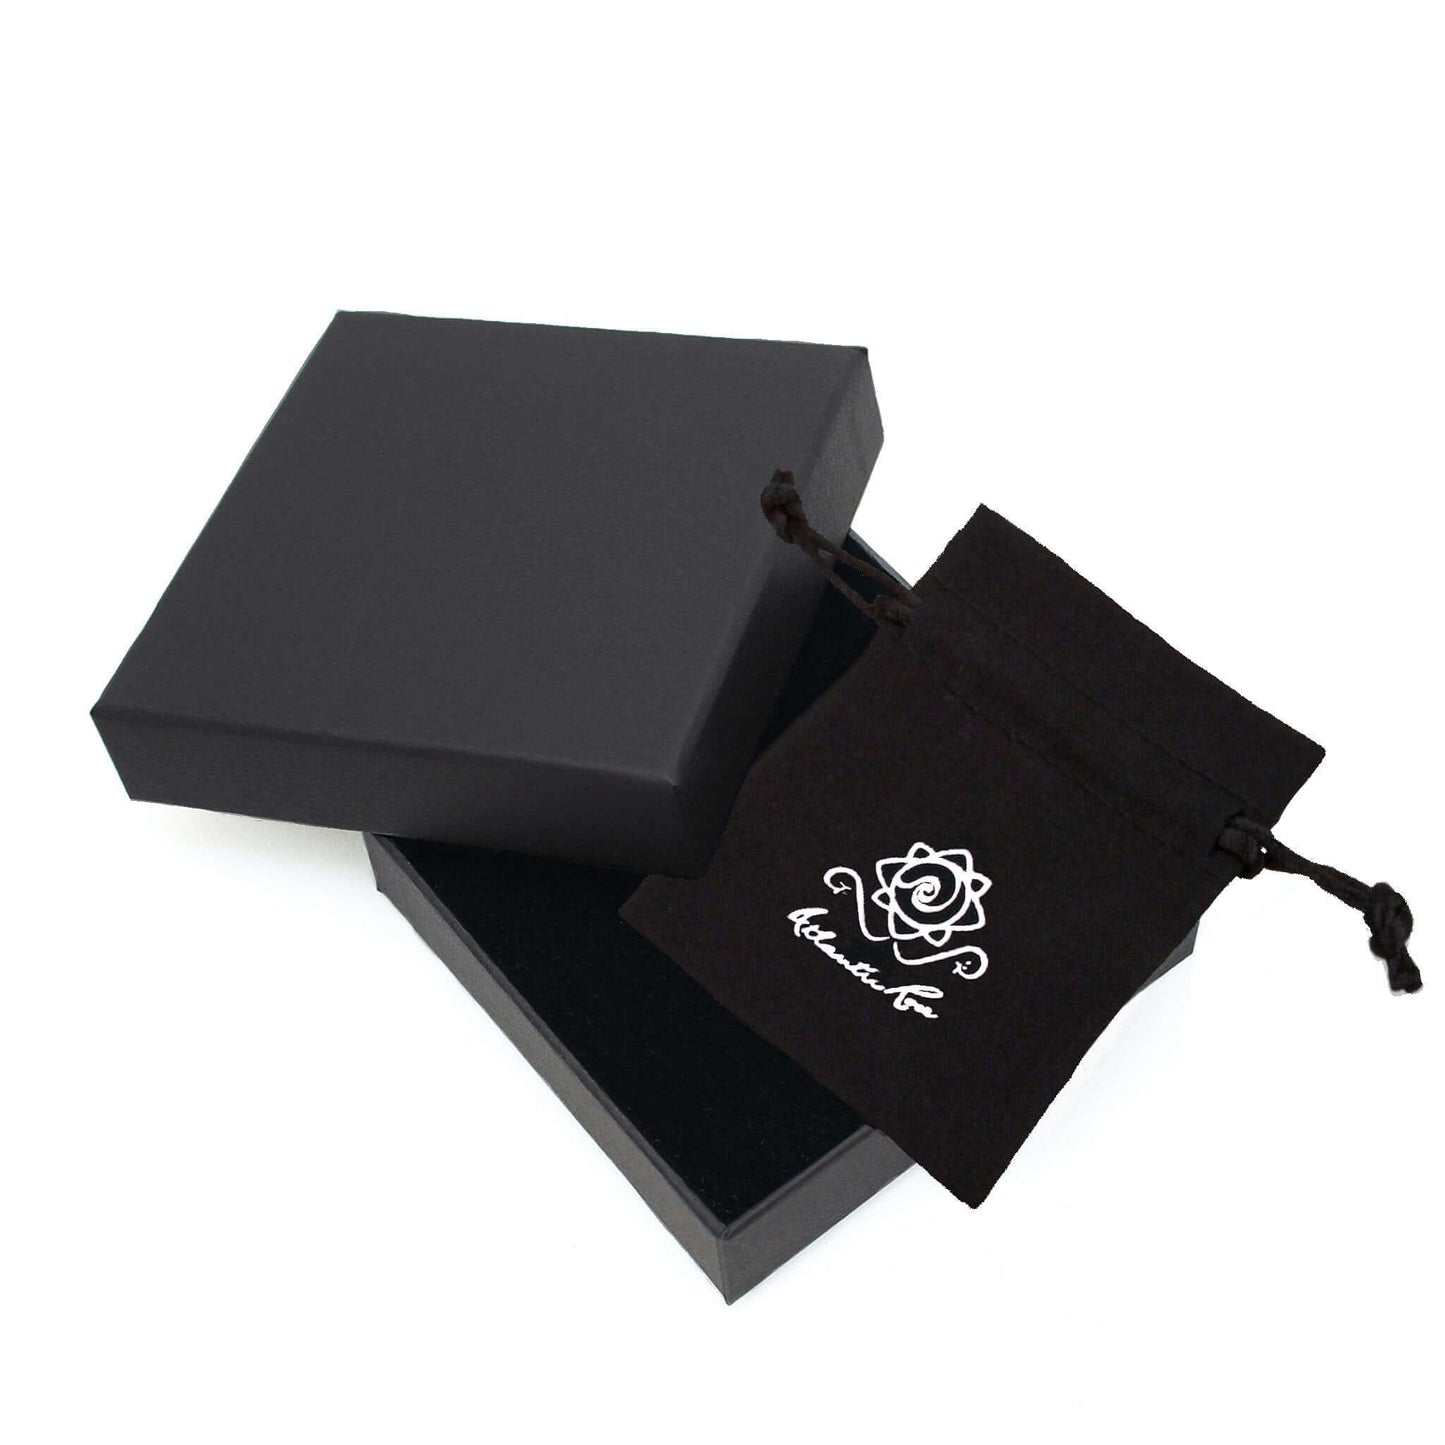 Atlantic Rose packaging : Black gift box made from recycled materials and Atlantic Rose branded black linen drawstring bag